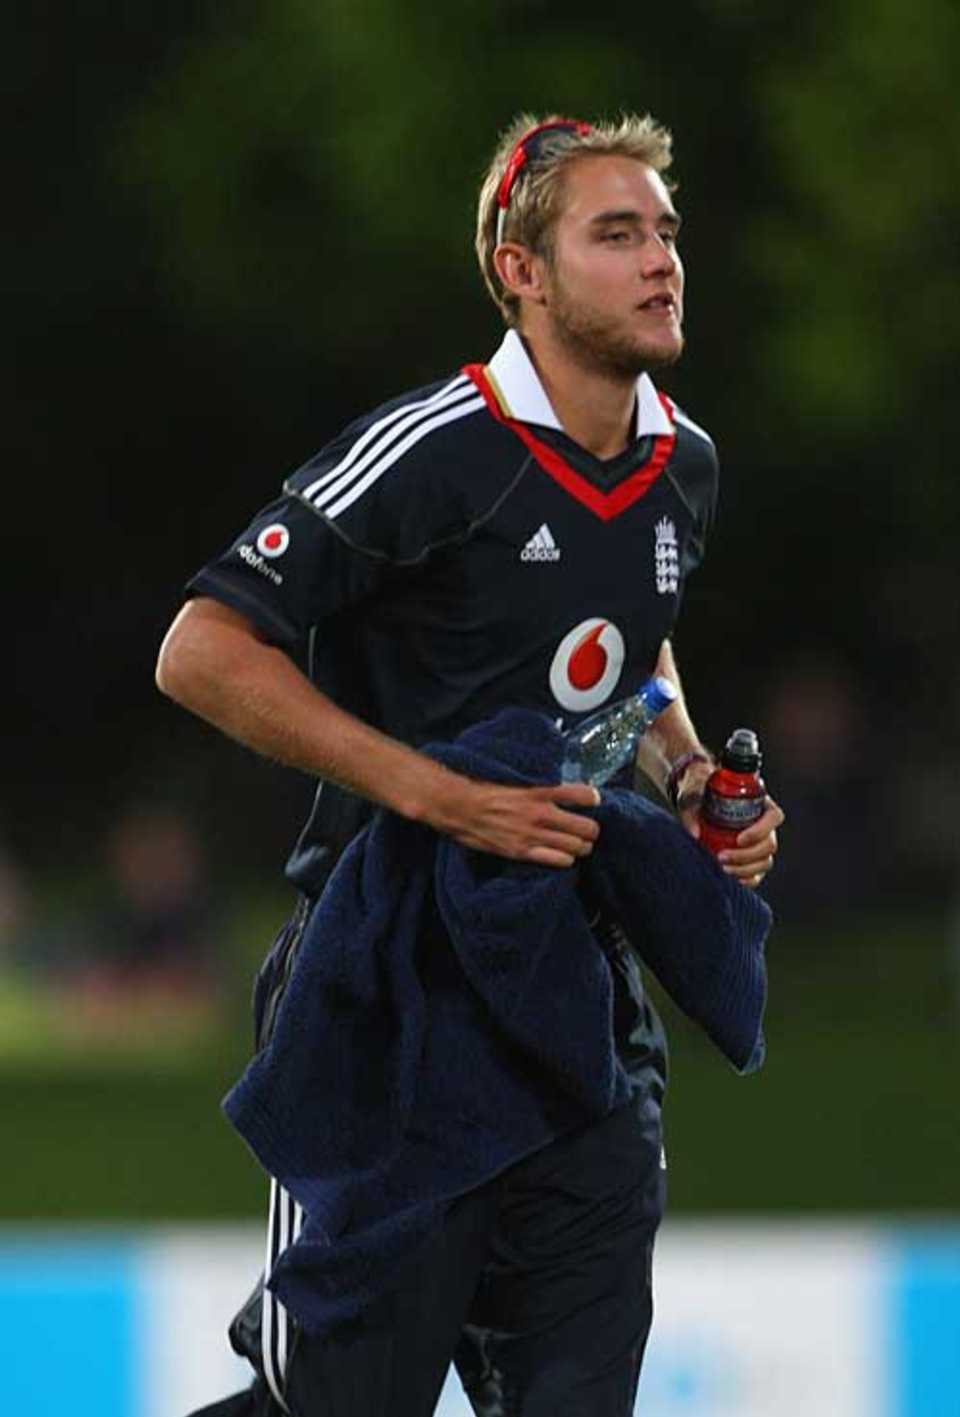 Stuart Broad is set to miss the Twenty20 matches against South Africa